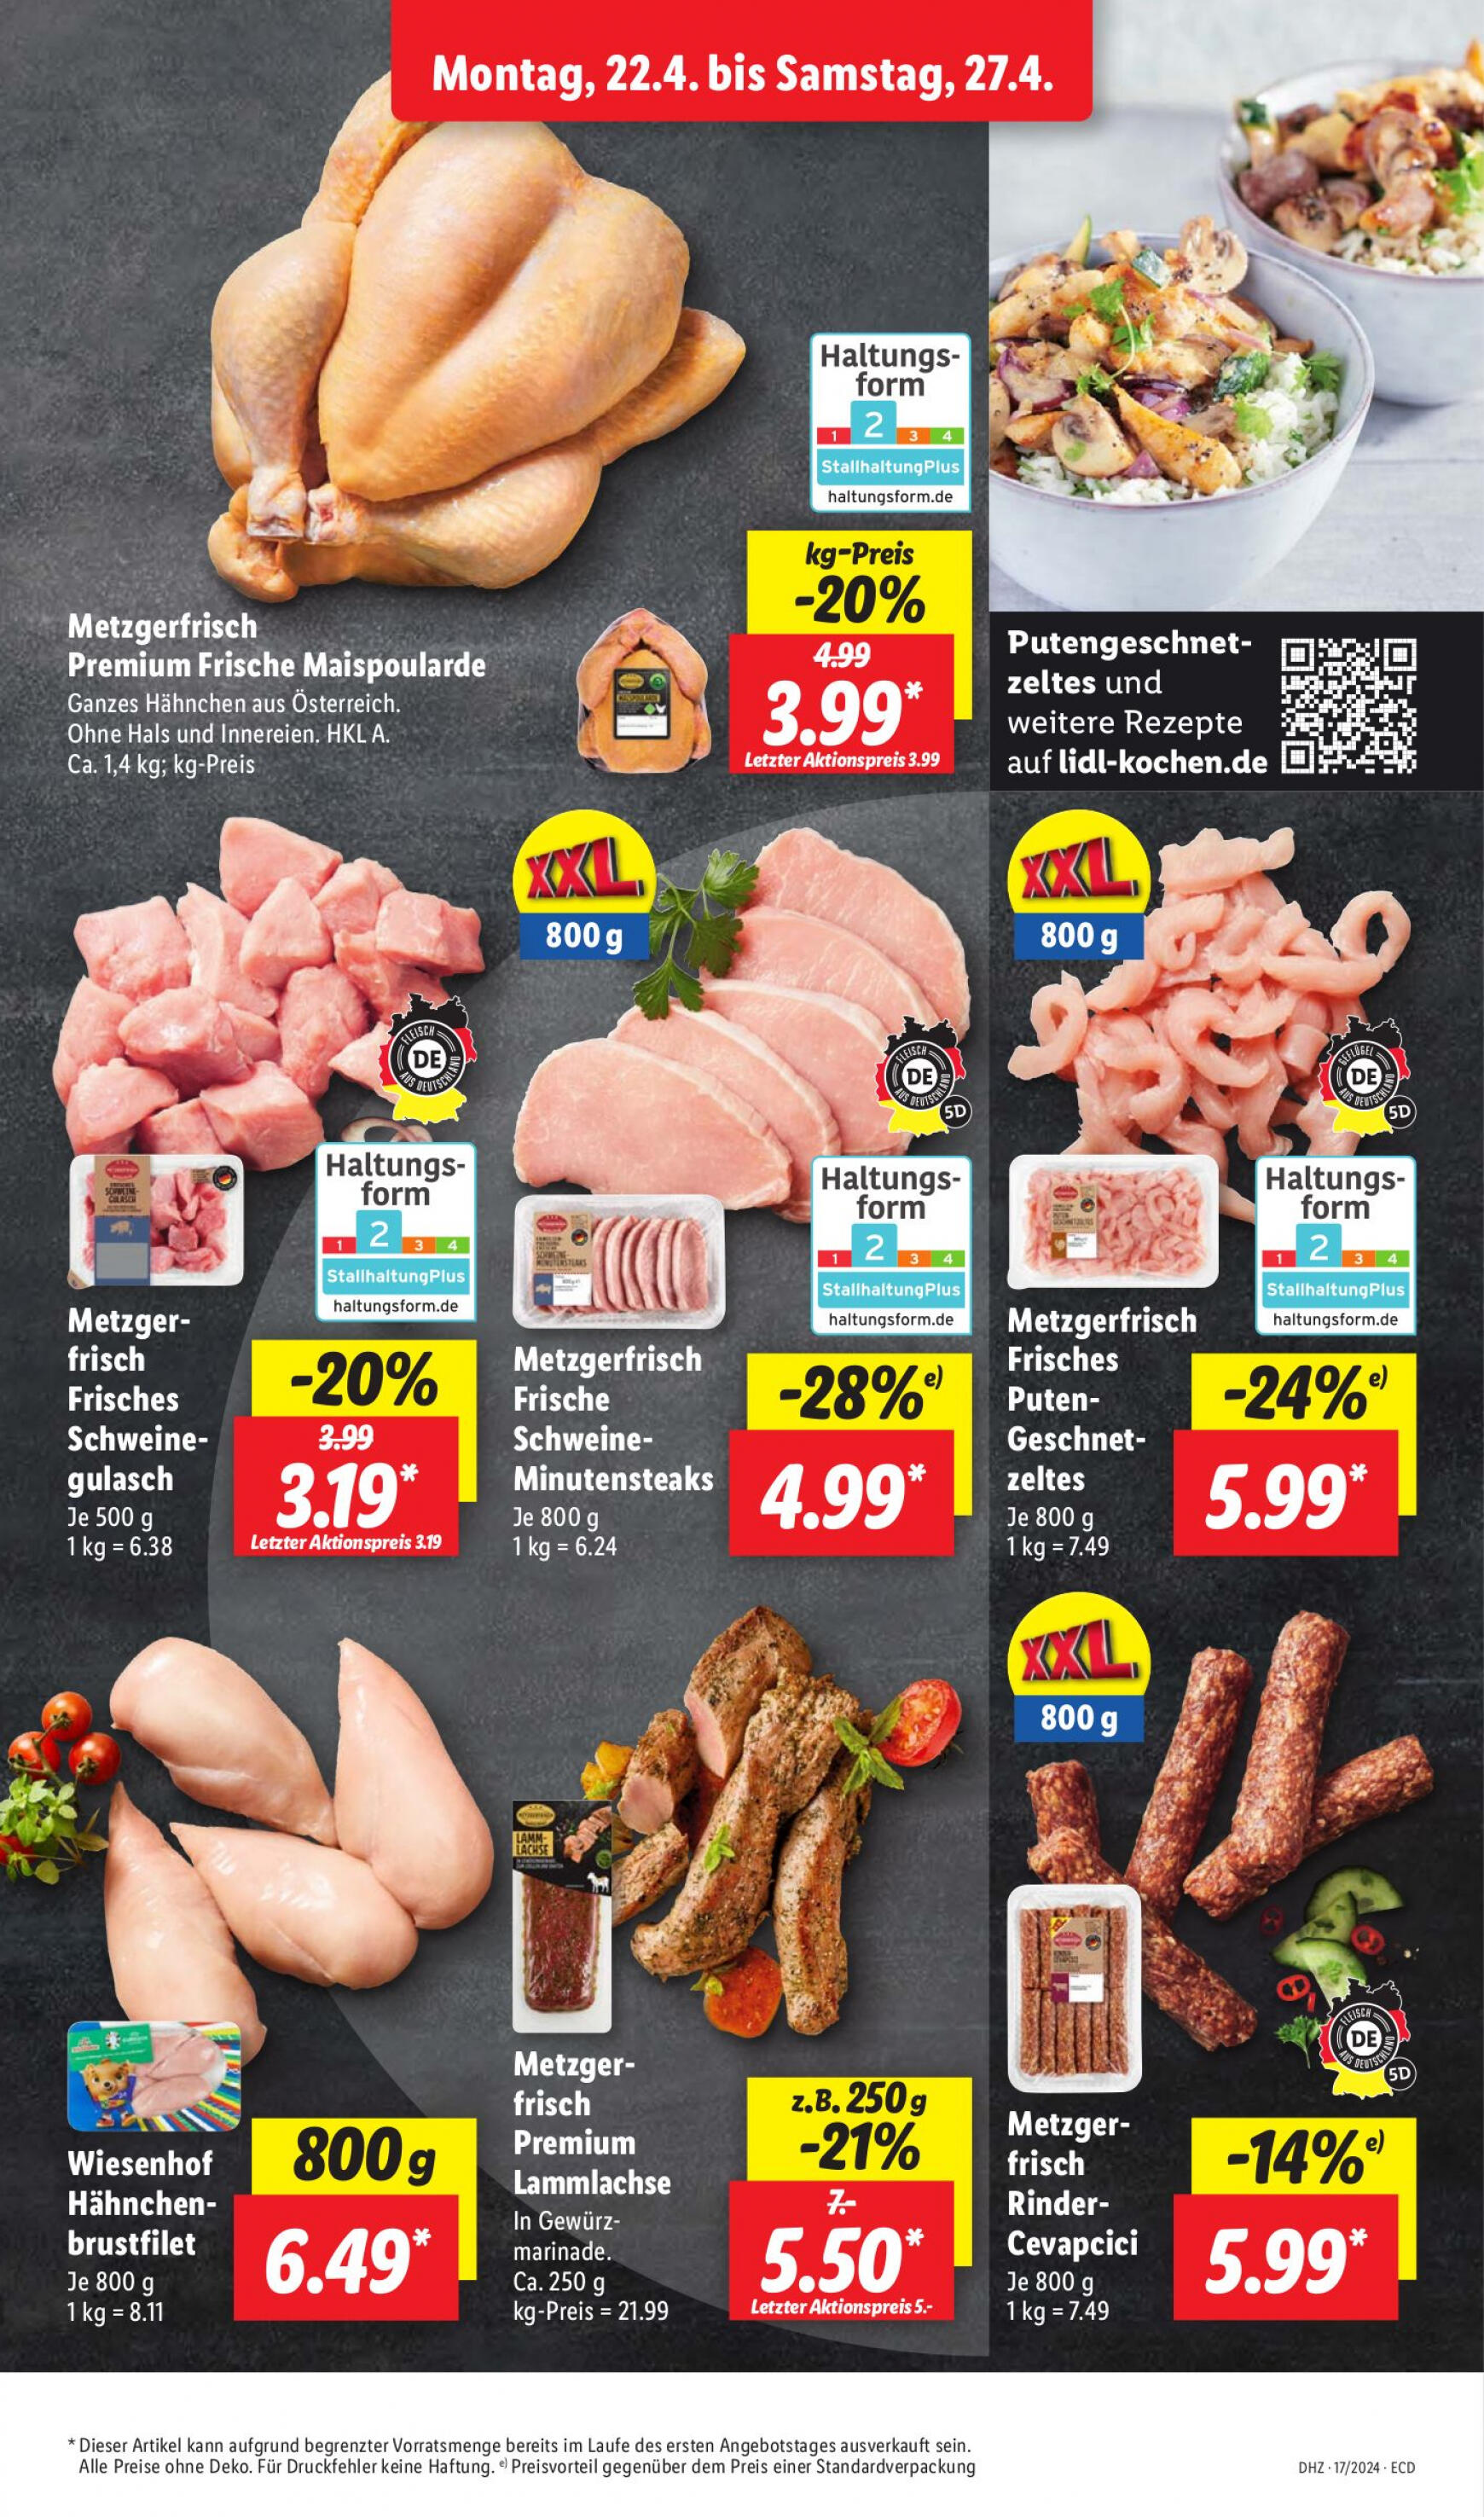 lidl - Flyer Lidl aktuell 22.04. - 27.04. - page: 7